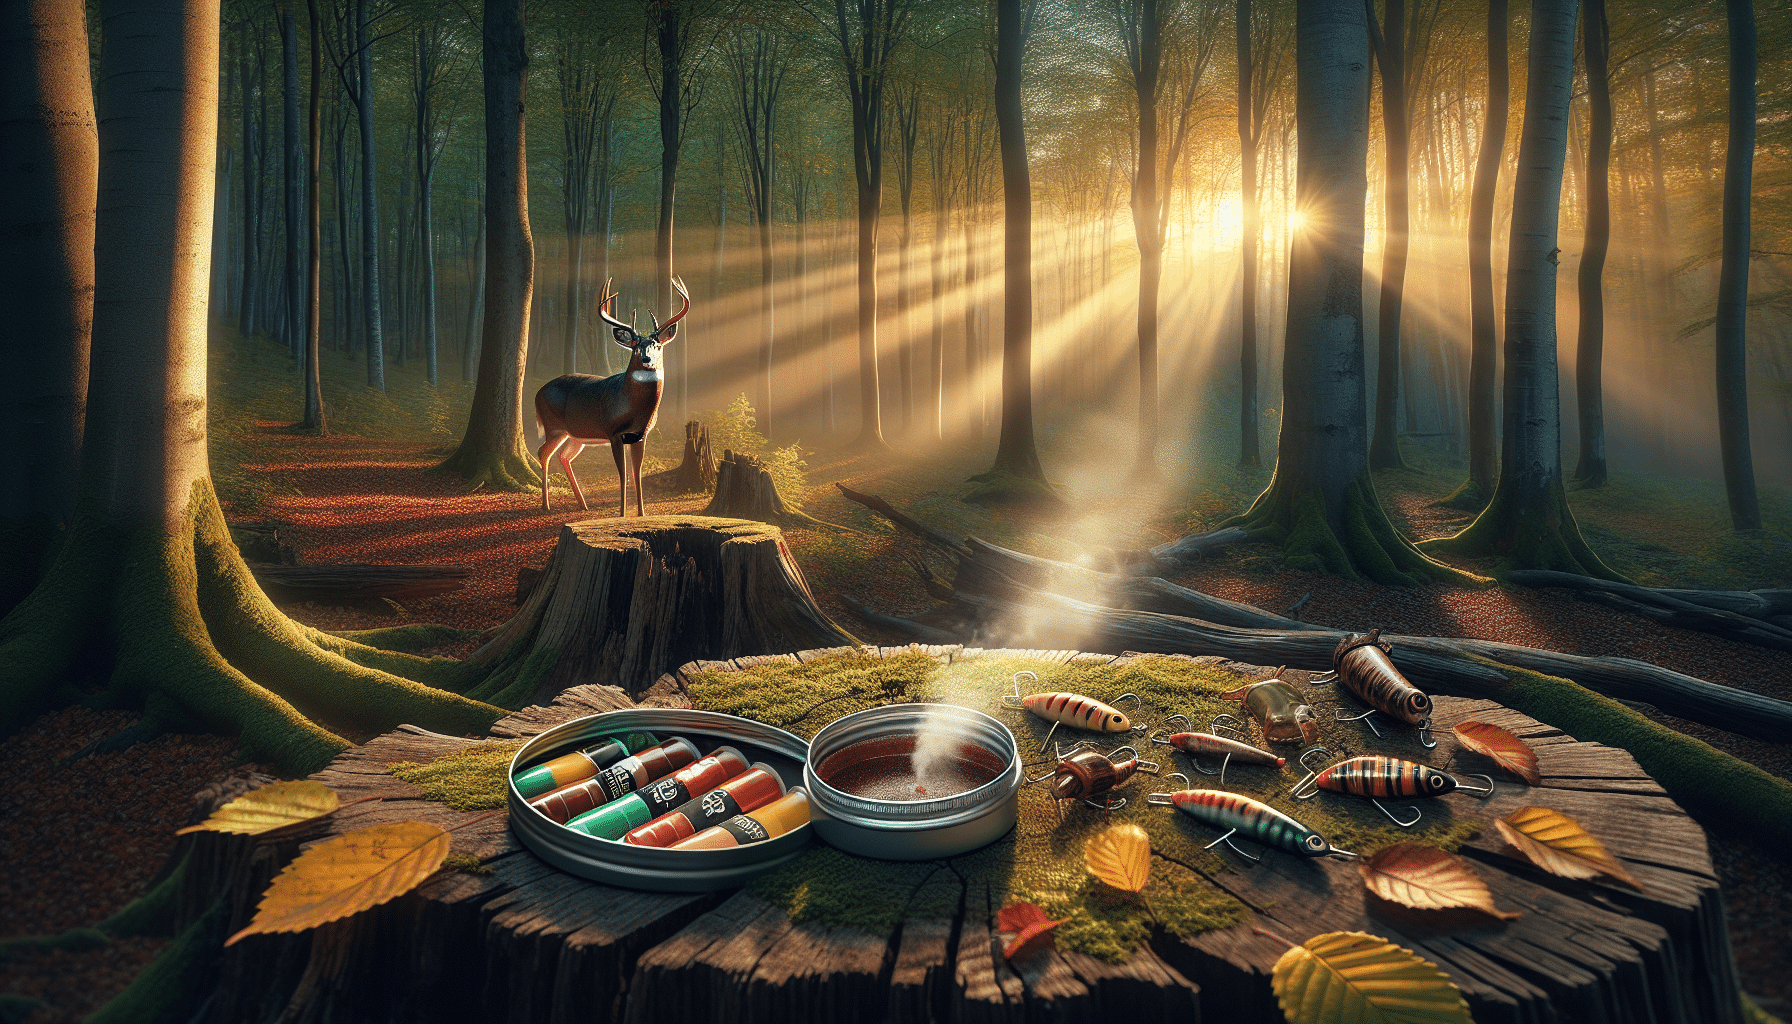 Visualize a scenic forest setting bathed in the early morning light. At the forefront of the image, a deer is standing, captivated and intrigued by the scent wafting through the air. Not far from the deer, is an open container with small hint of steam coming out indicating the scent. A few metres away, a collection of carefully arranged lures lay on an old weathered tree stump. Bed of freshly fallen leaves surround the setting. No people, text or brand logos are included in the image.